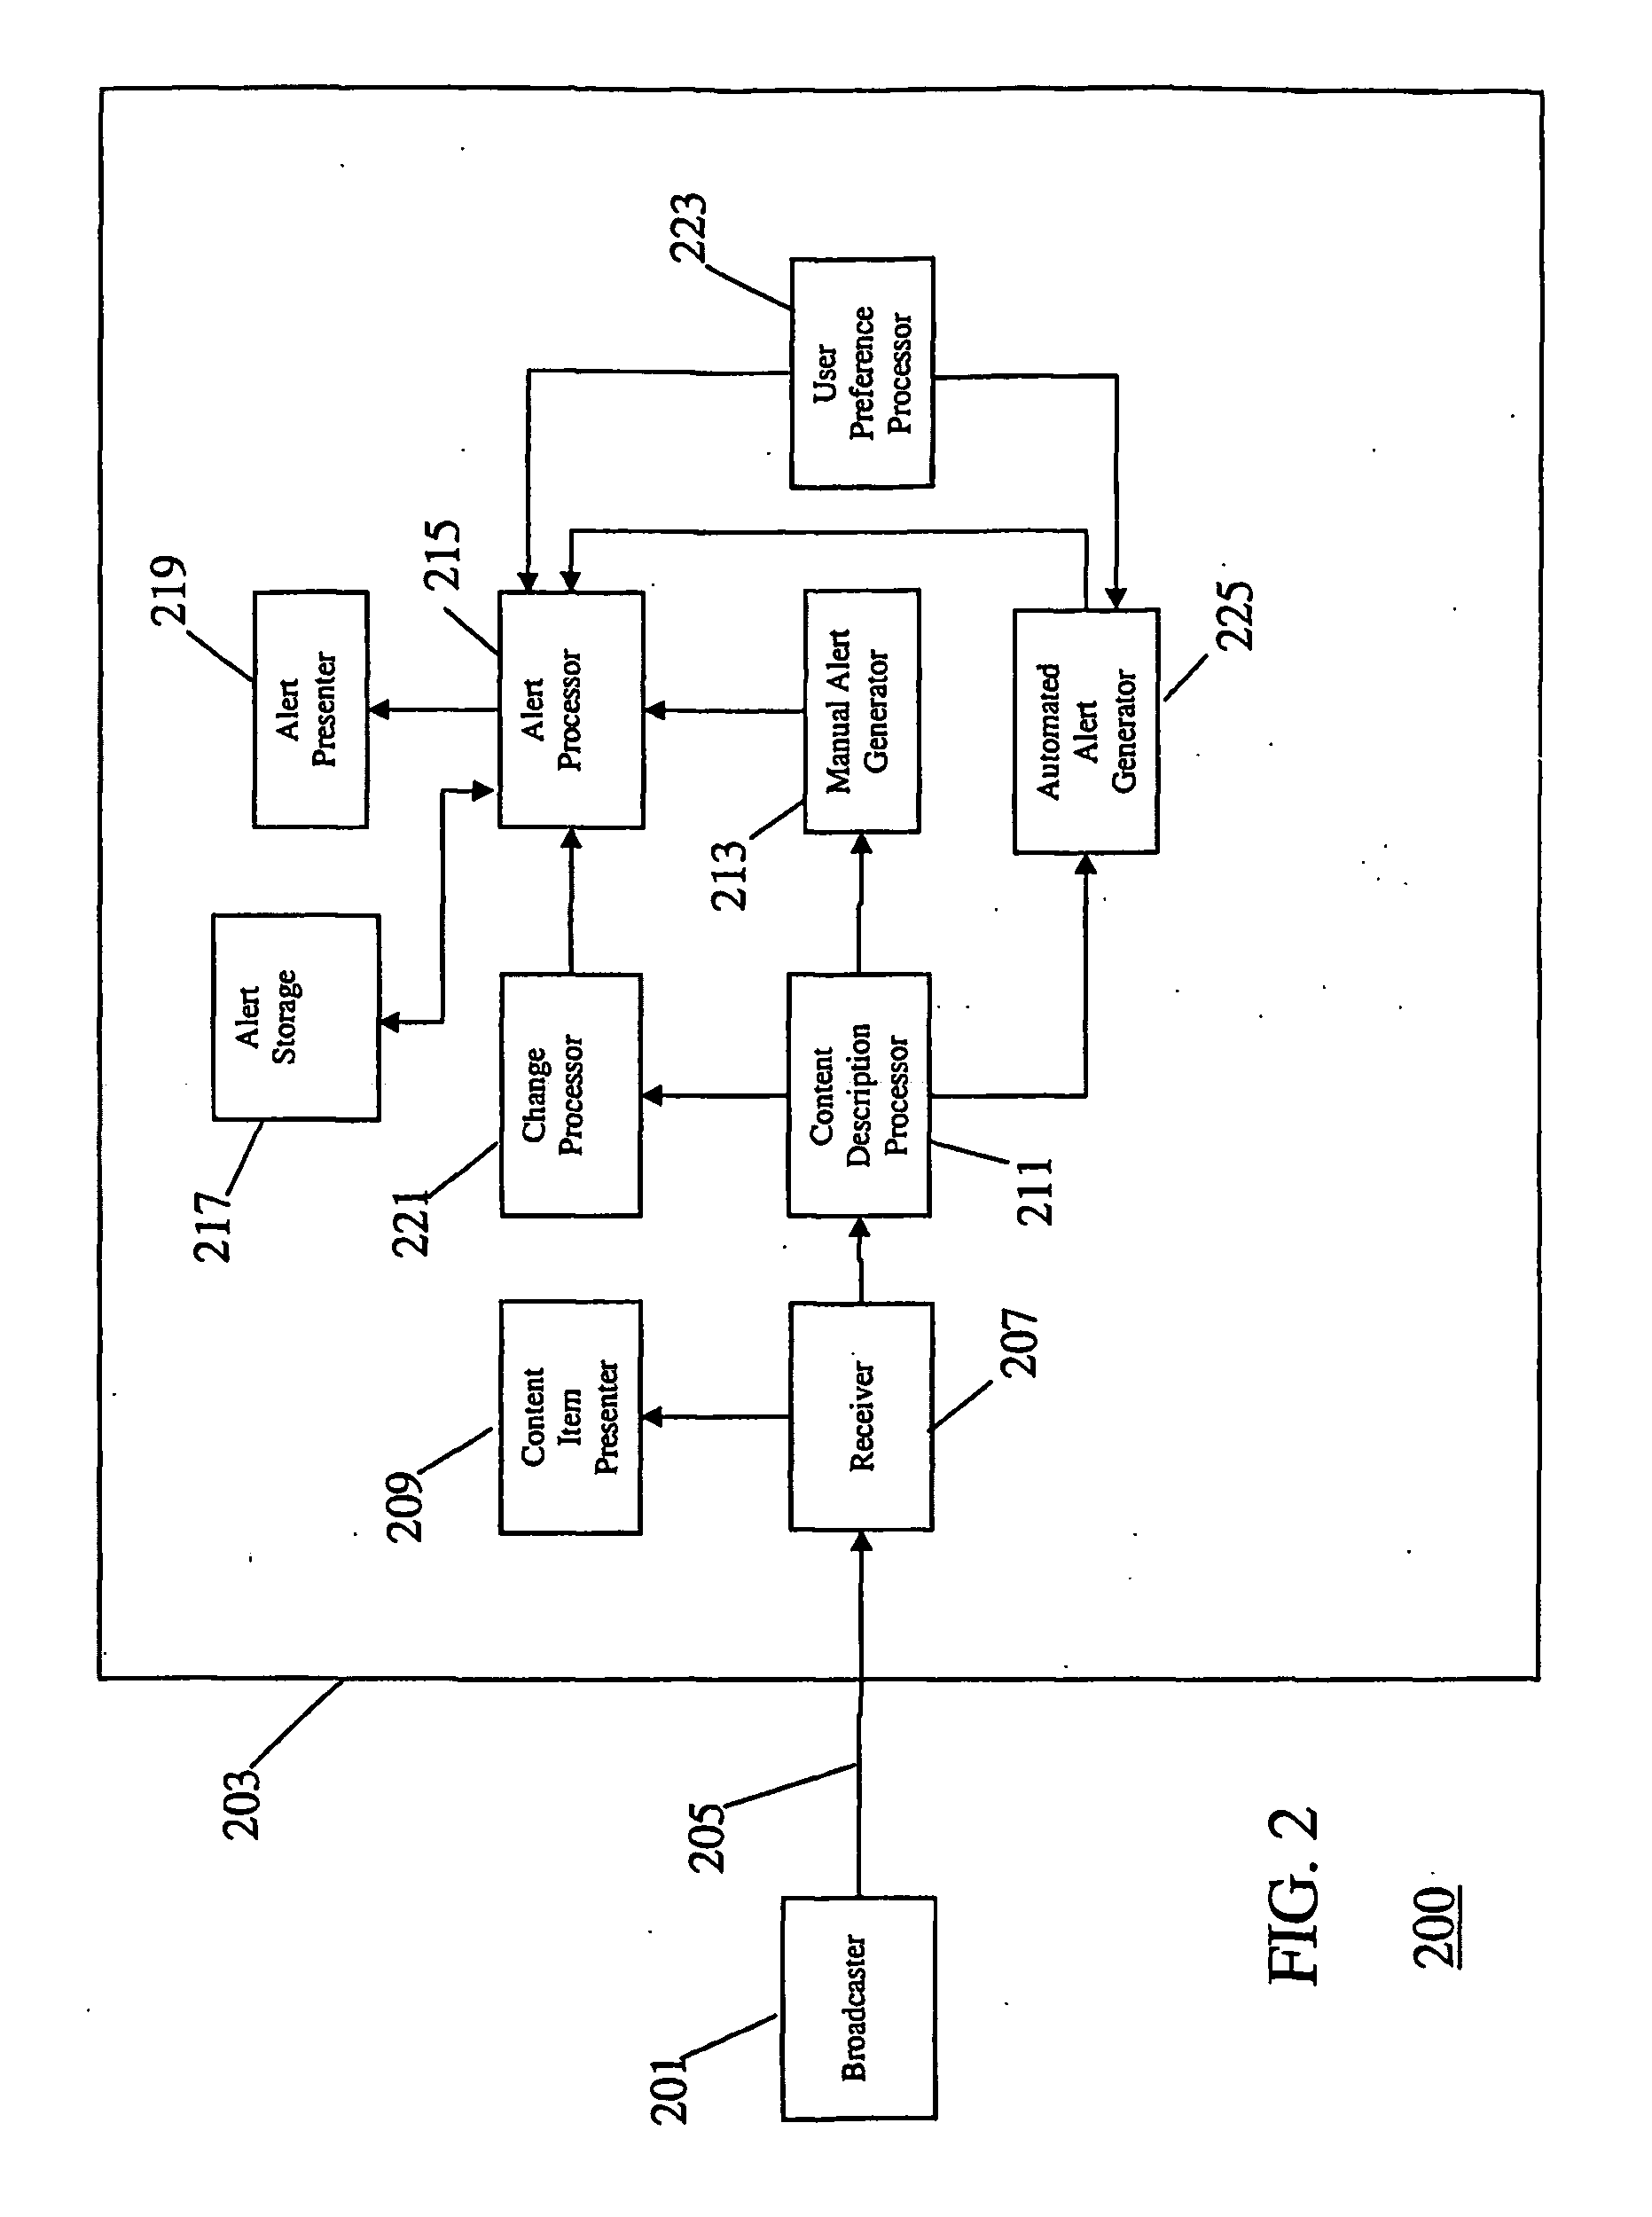 Method and apparatus for alert management